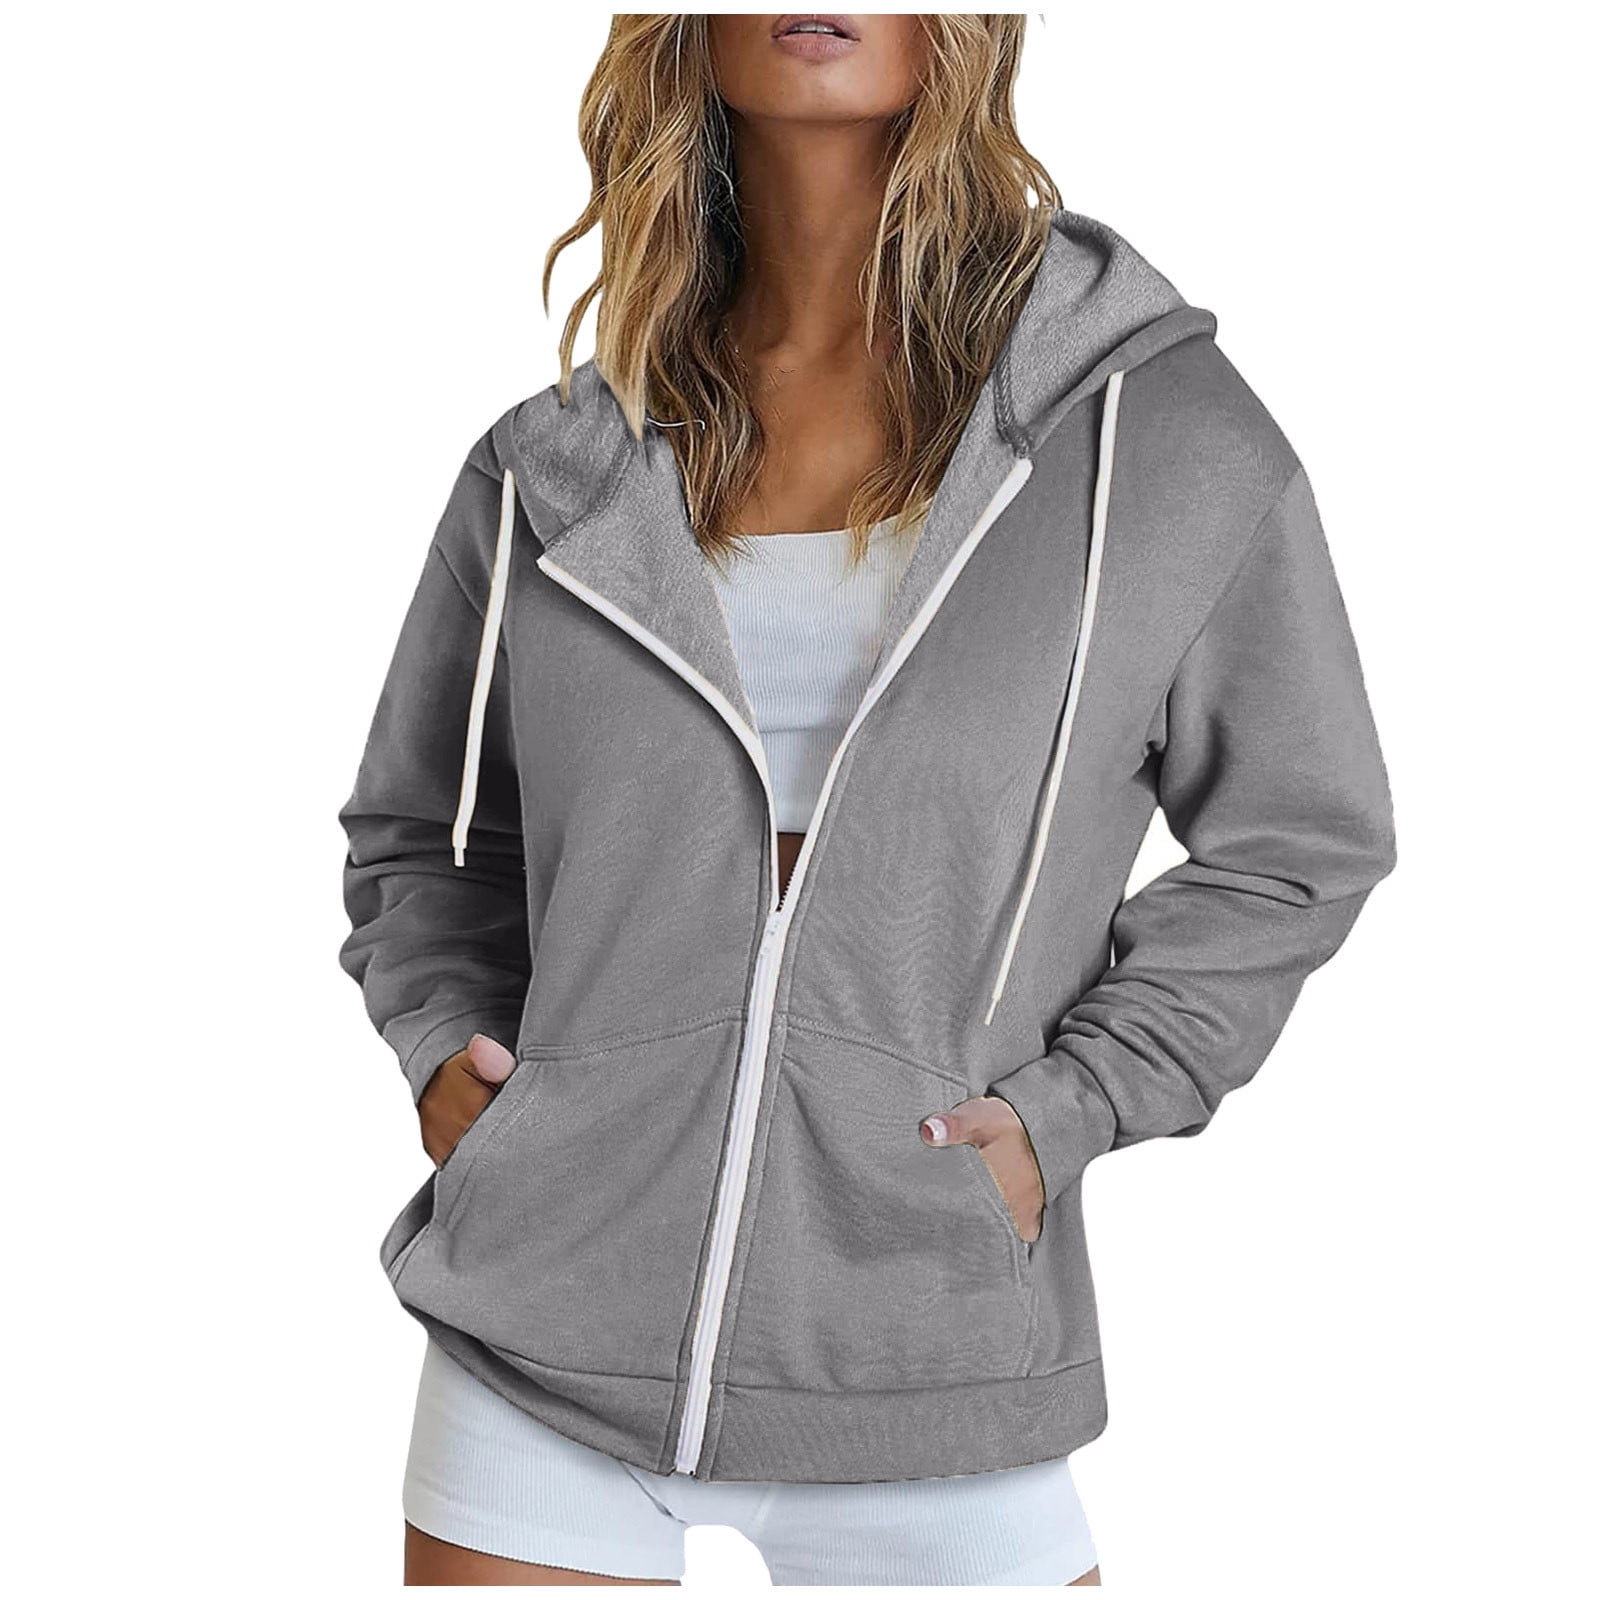 Full Zip-up Jackets with Pockets for Women Cotton Plain Hoodie Outwear ...